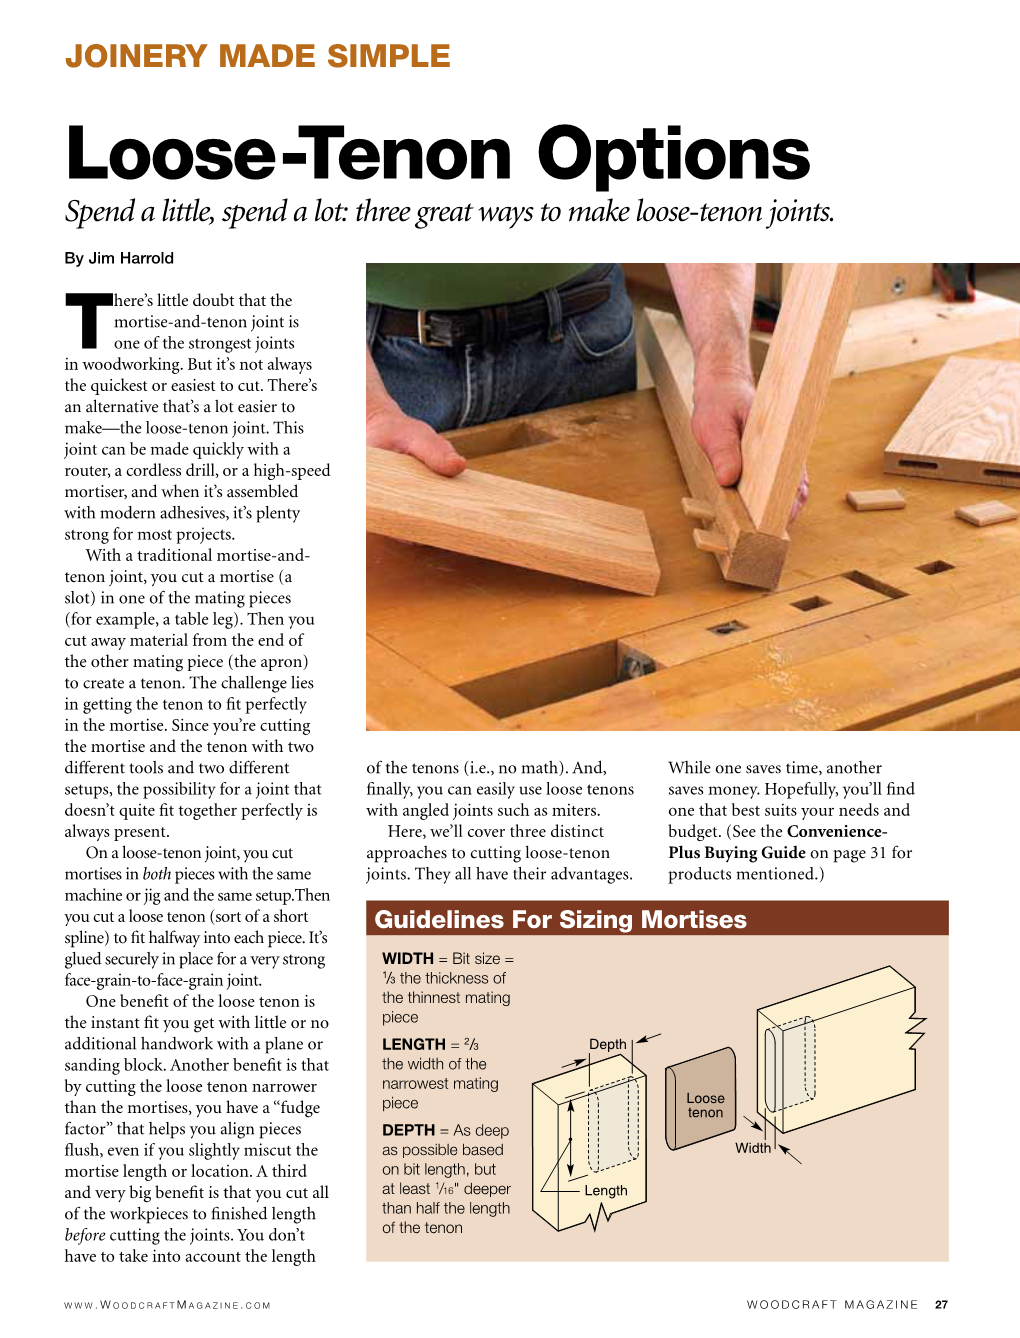 Loose-Tenon Options Spend a Little, Spend a Lot: Three Great Ways to Make Loose-Tenon Joints